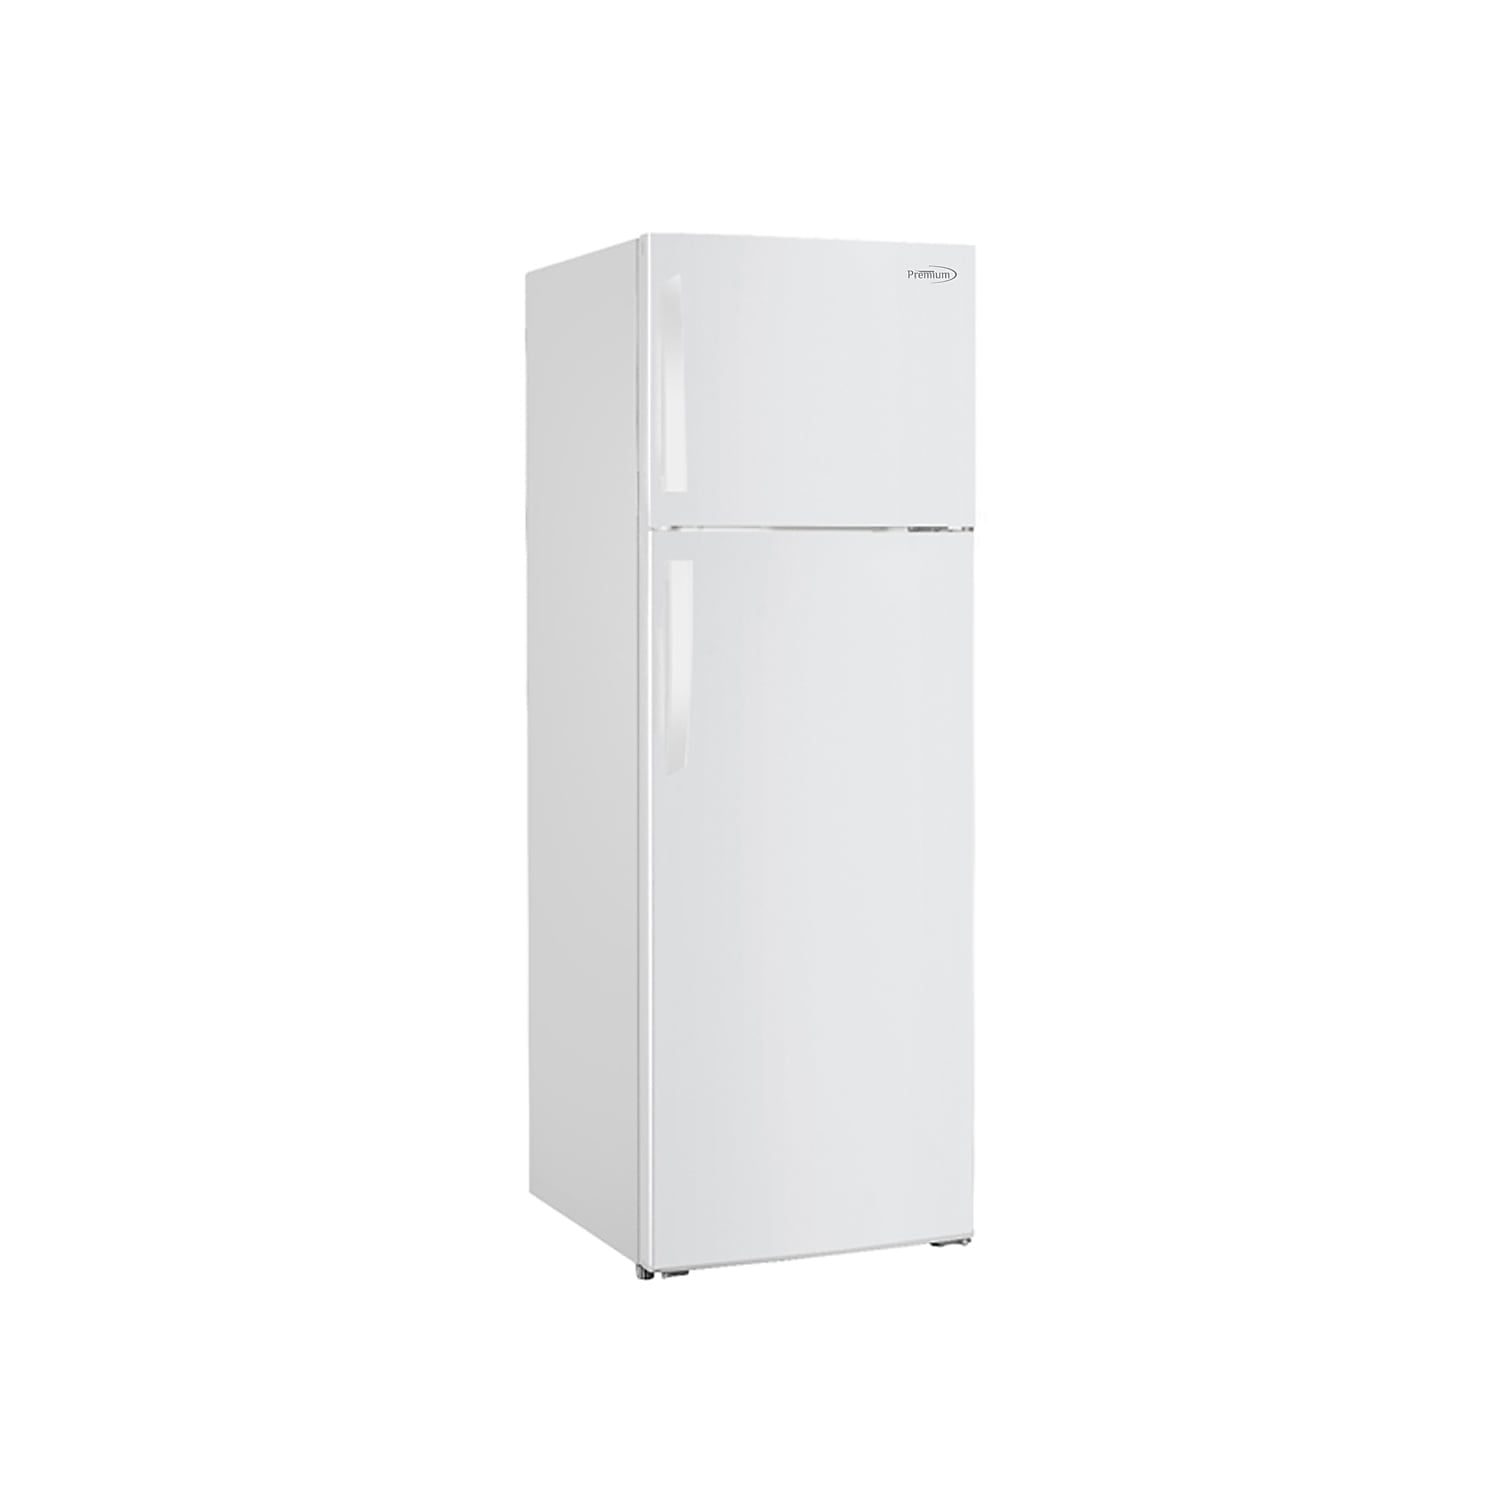 Nat.quality 7.5 Cu. ft. Rapidcold Frost-Free R